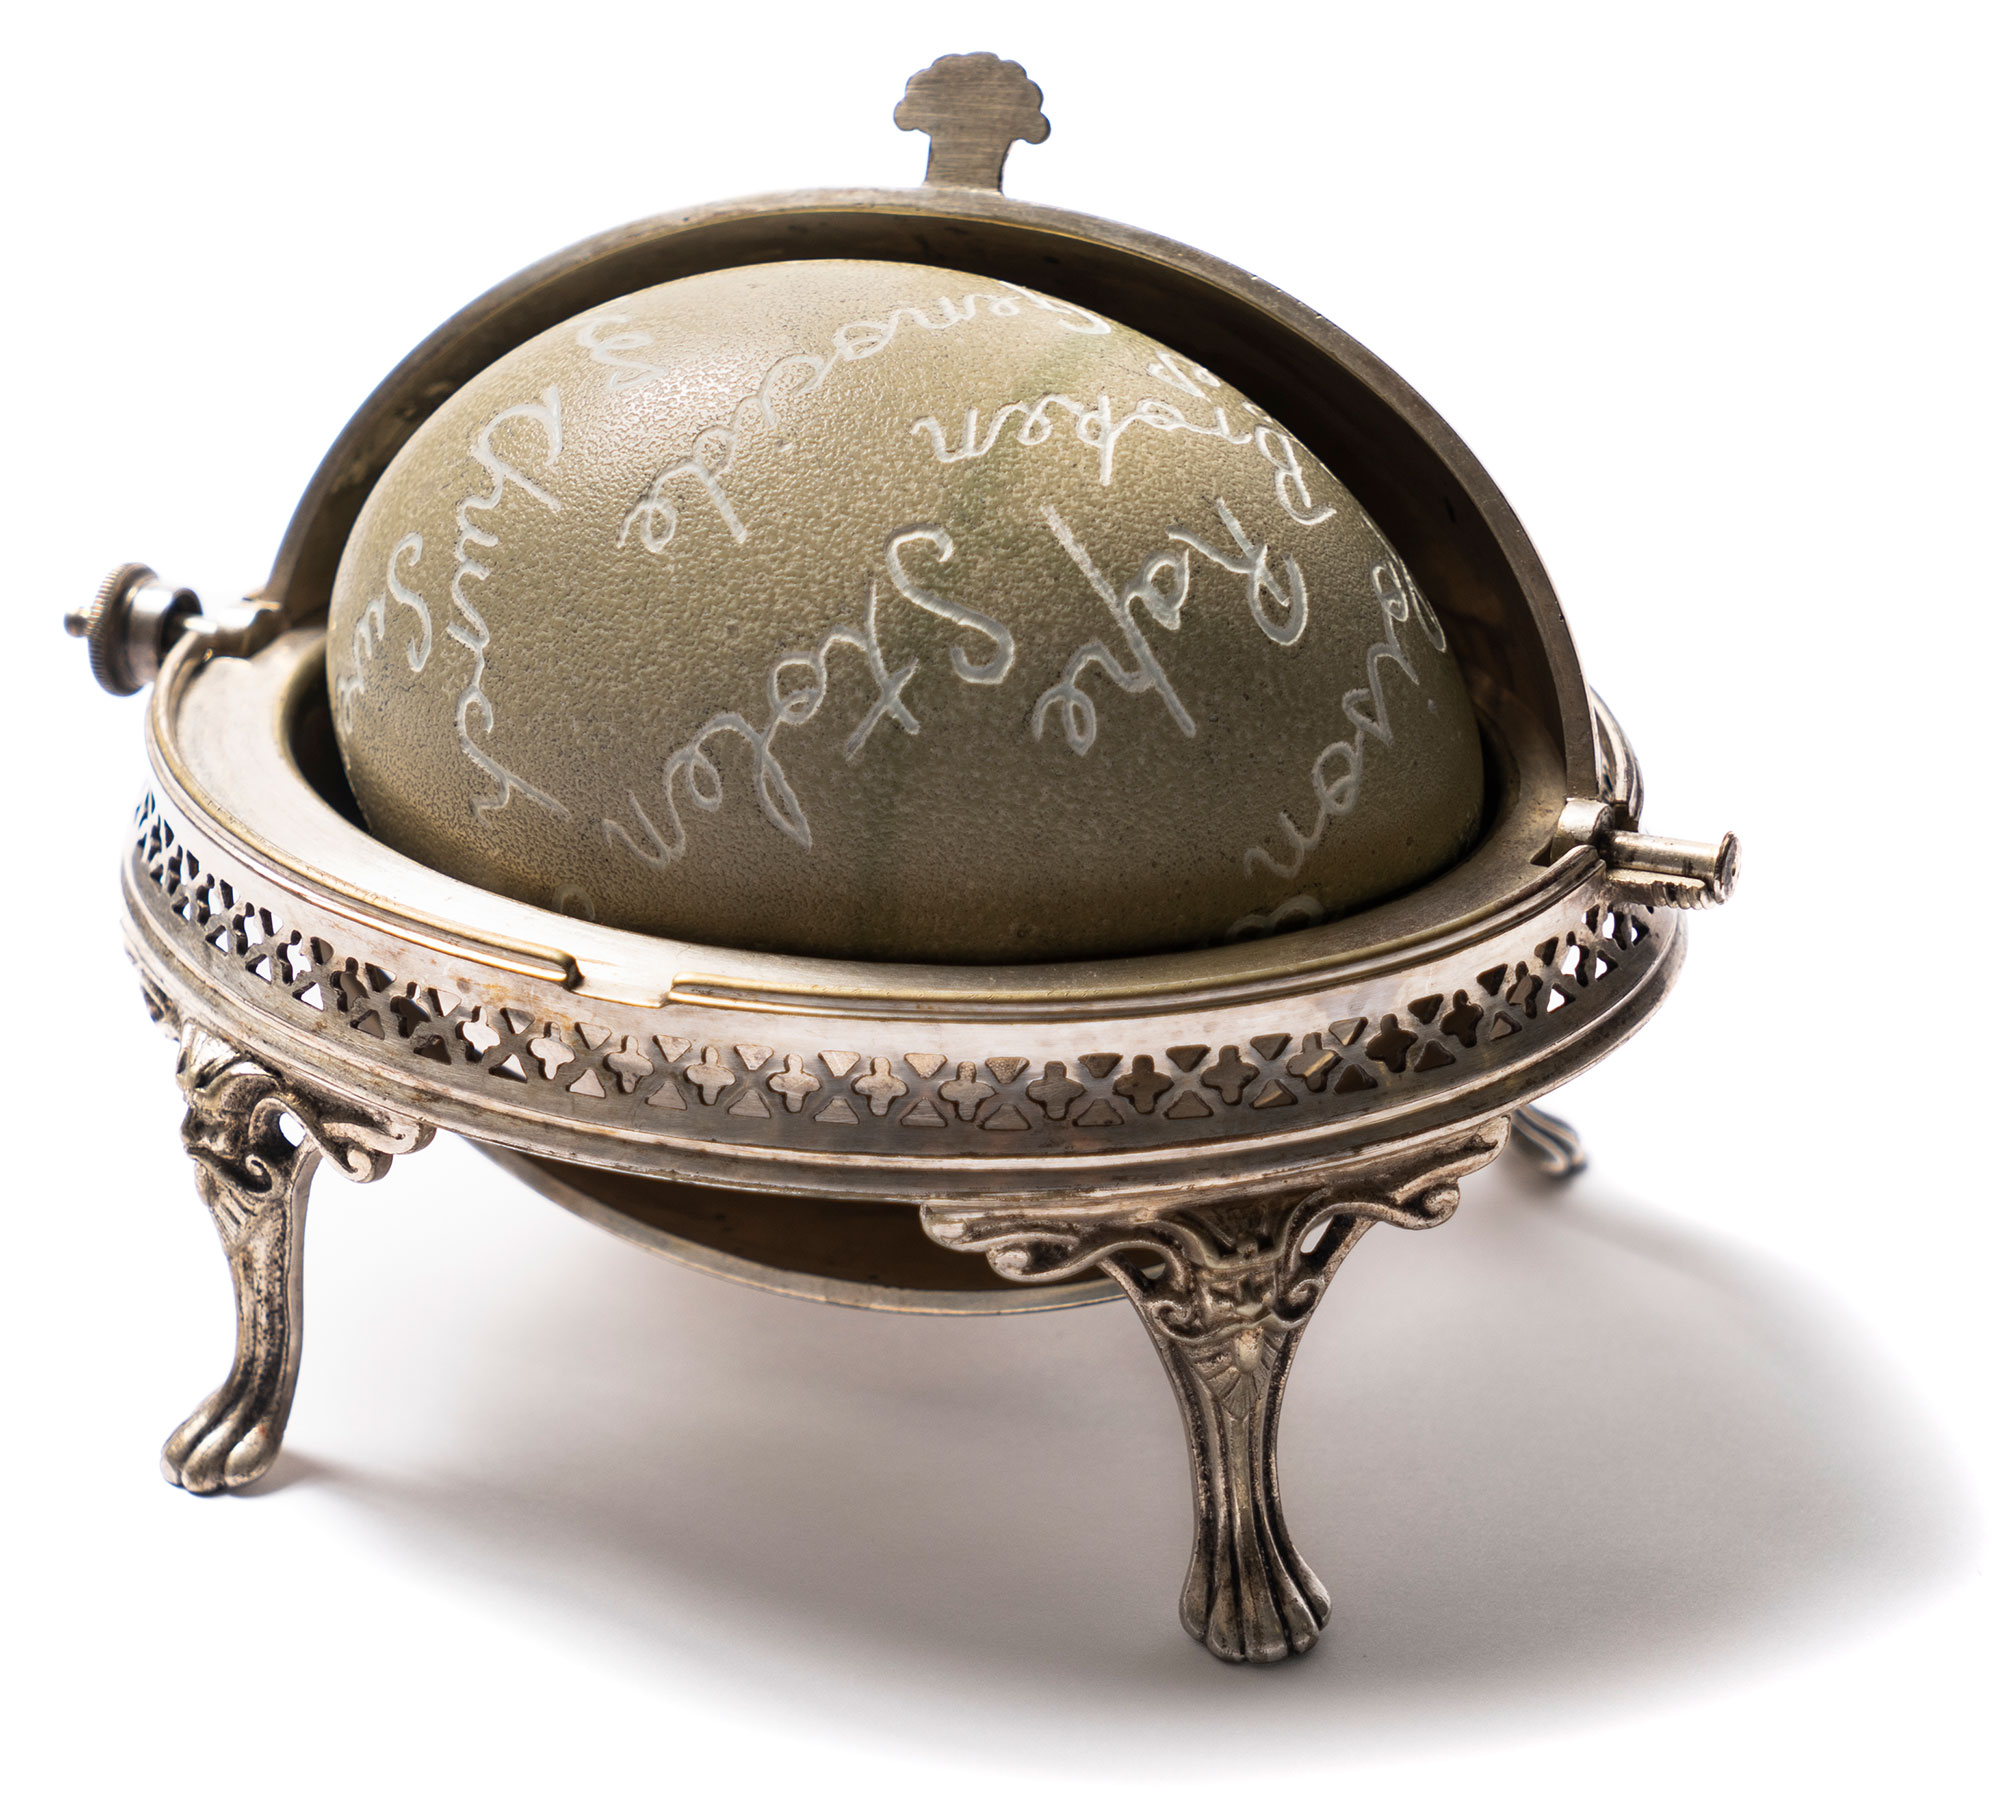 Glennys BRIGGS 'Swallow these words' 2020 | emu egg (etched) and silver sweet dish | Courtesy of the artist | Photo by Louis Lim